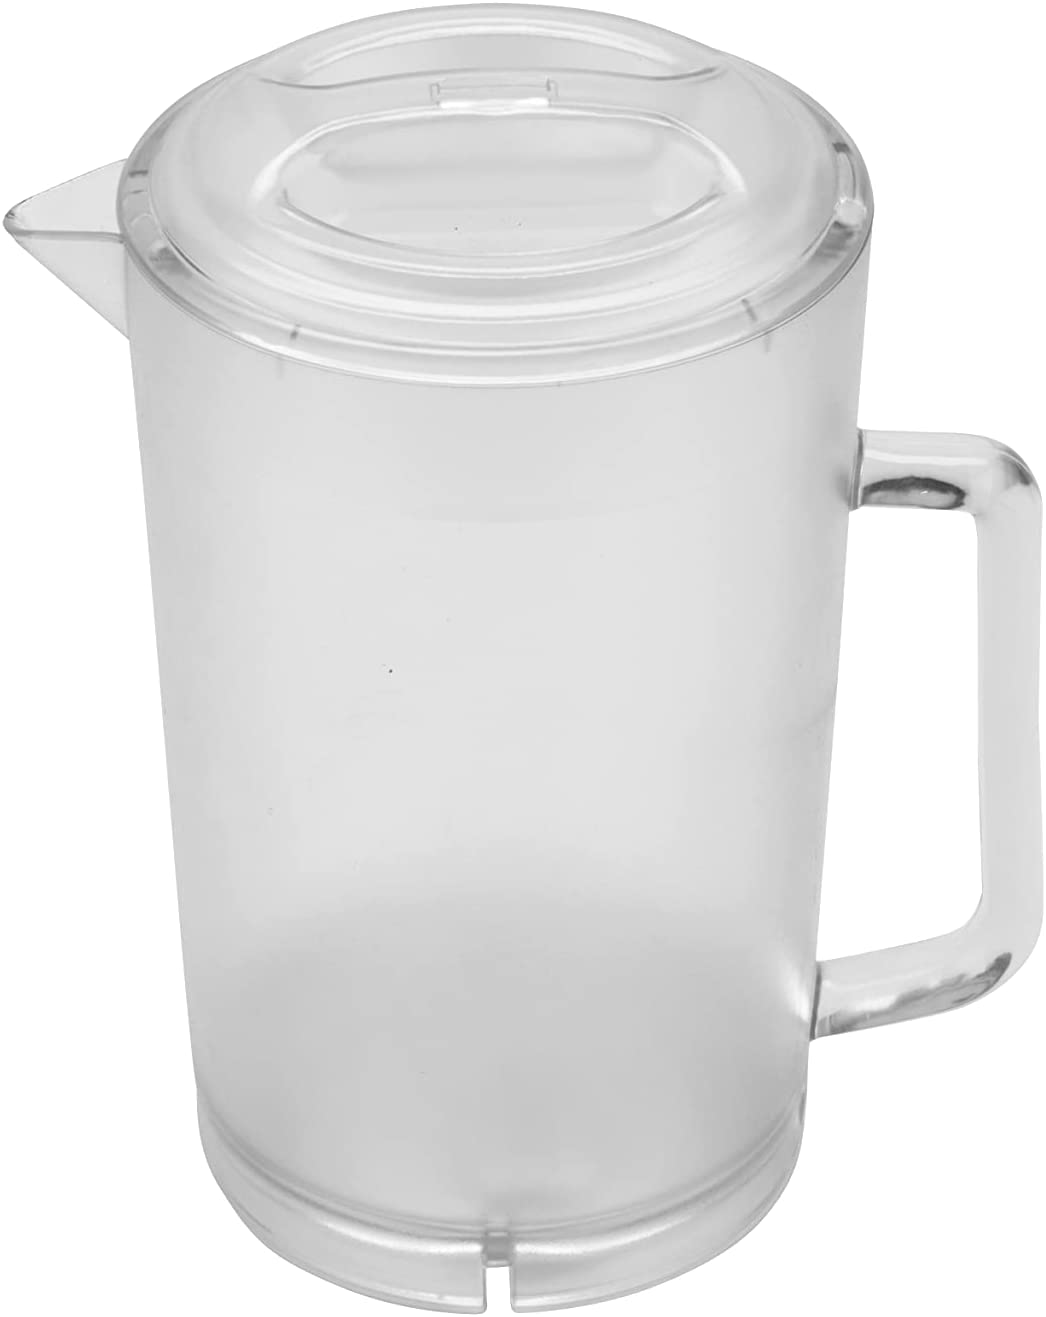 Rubbermaid Covered Pitcher, 2 1/4 Quart - SANE - Sewing and Housewares